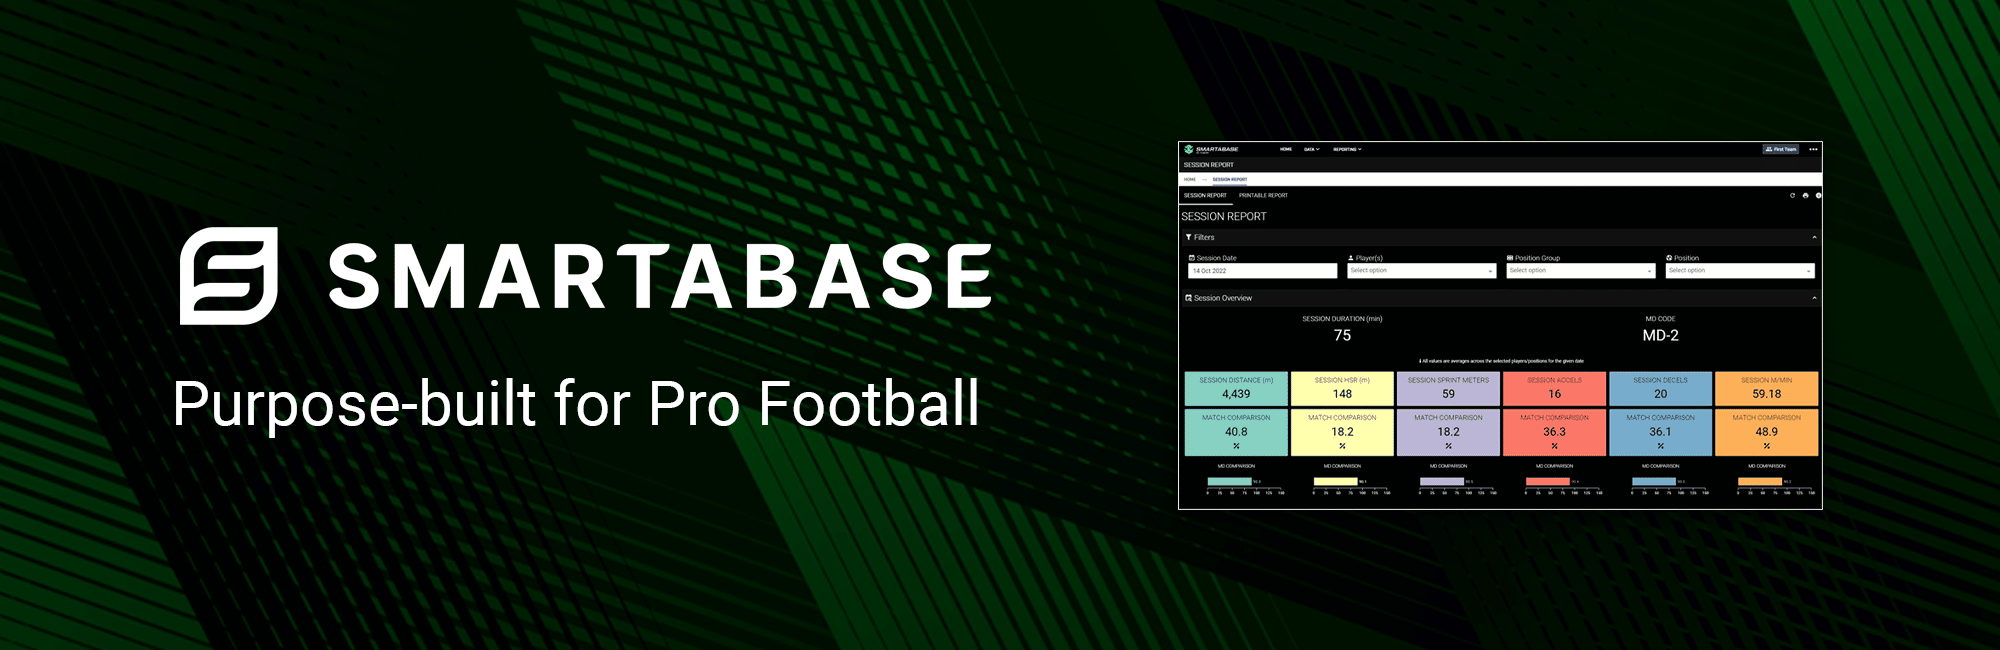 Smartabase for Pro Football Clubs